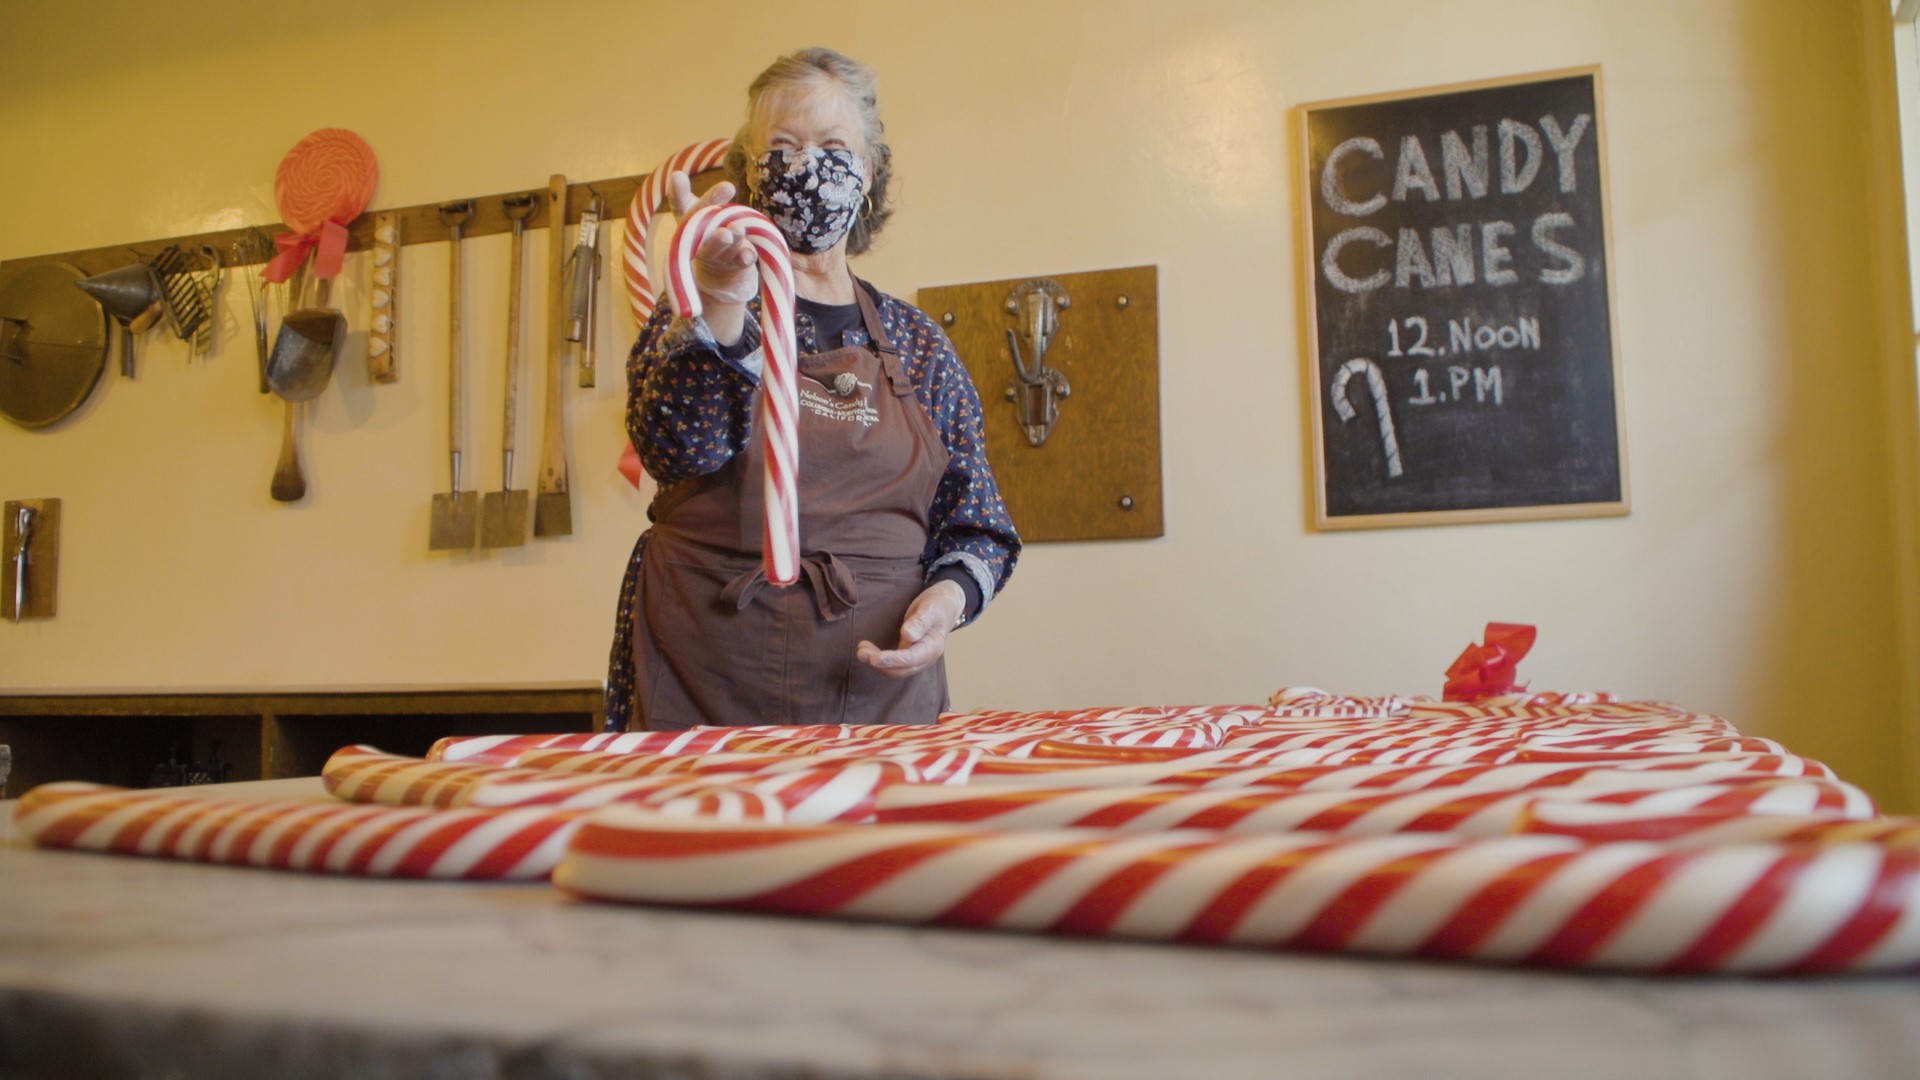 Modern candy cane factories make them by the thousands, but Columbia Candy Kitchen makes them the old fashion way.